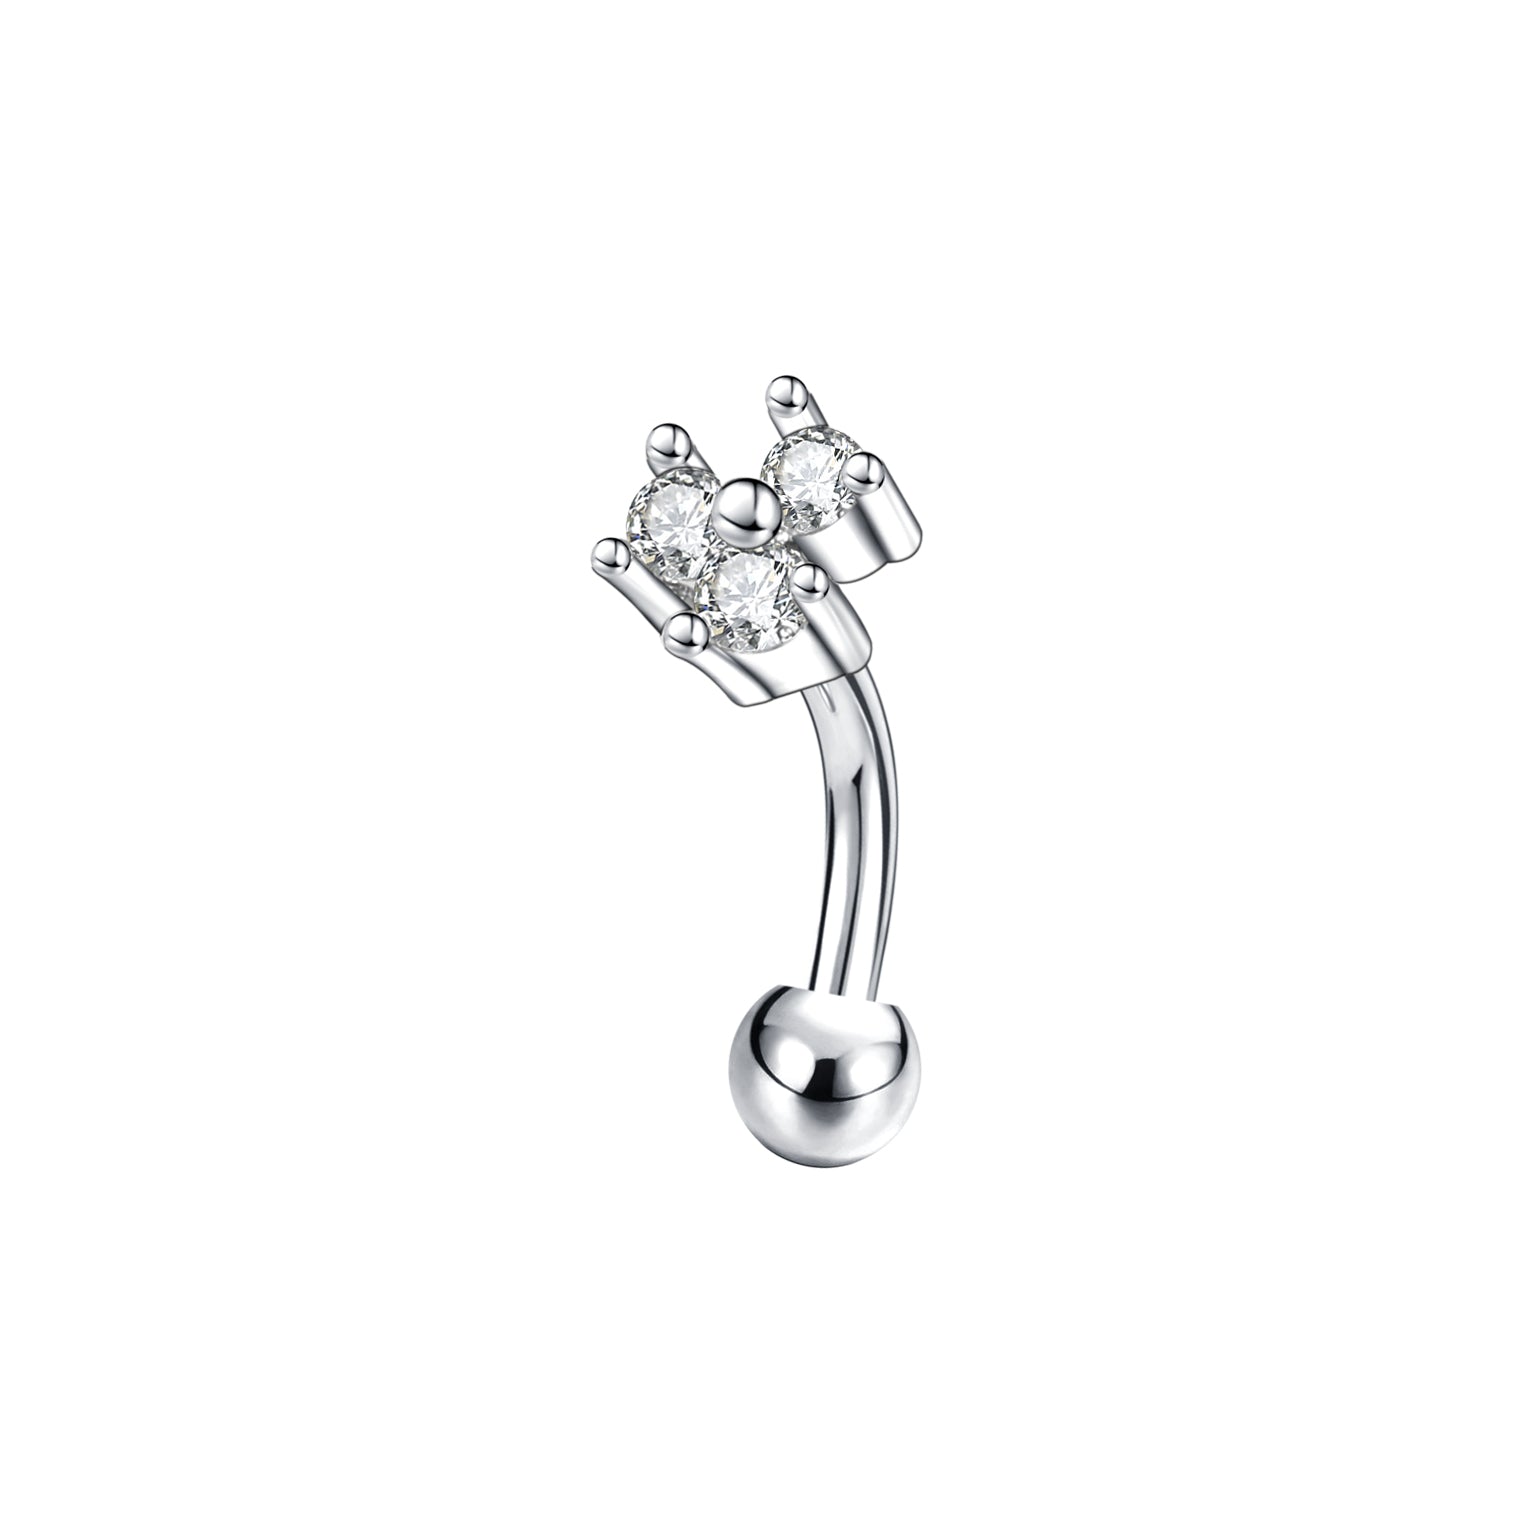 16g CZ Crystal Eyebrow Ring Piercing Barbell Curved Helix Daith Rook Piercing